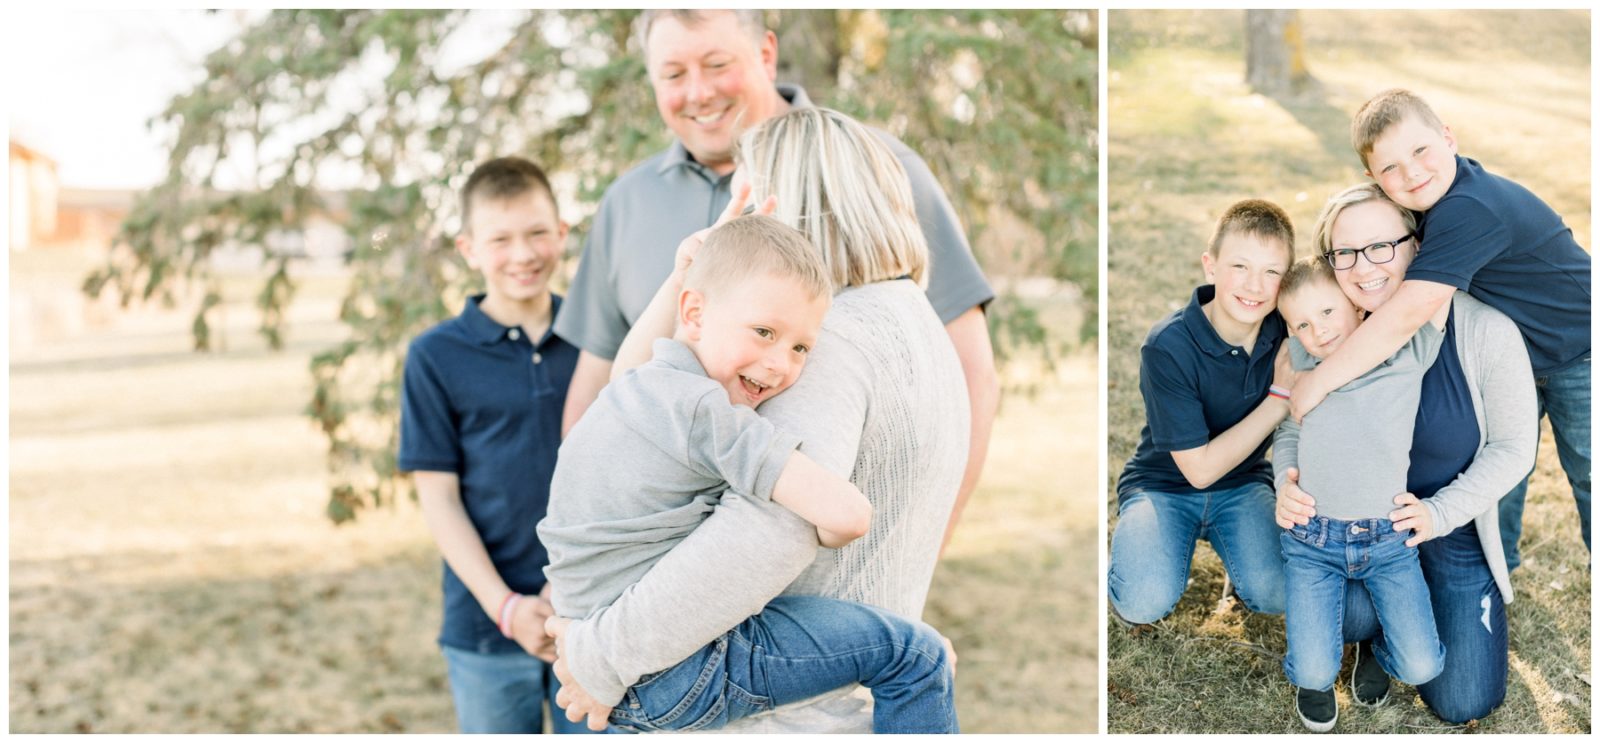 A photo session is The Perfect Mother's Day Gift! 